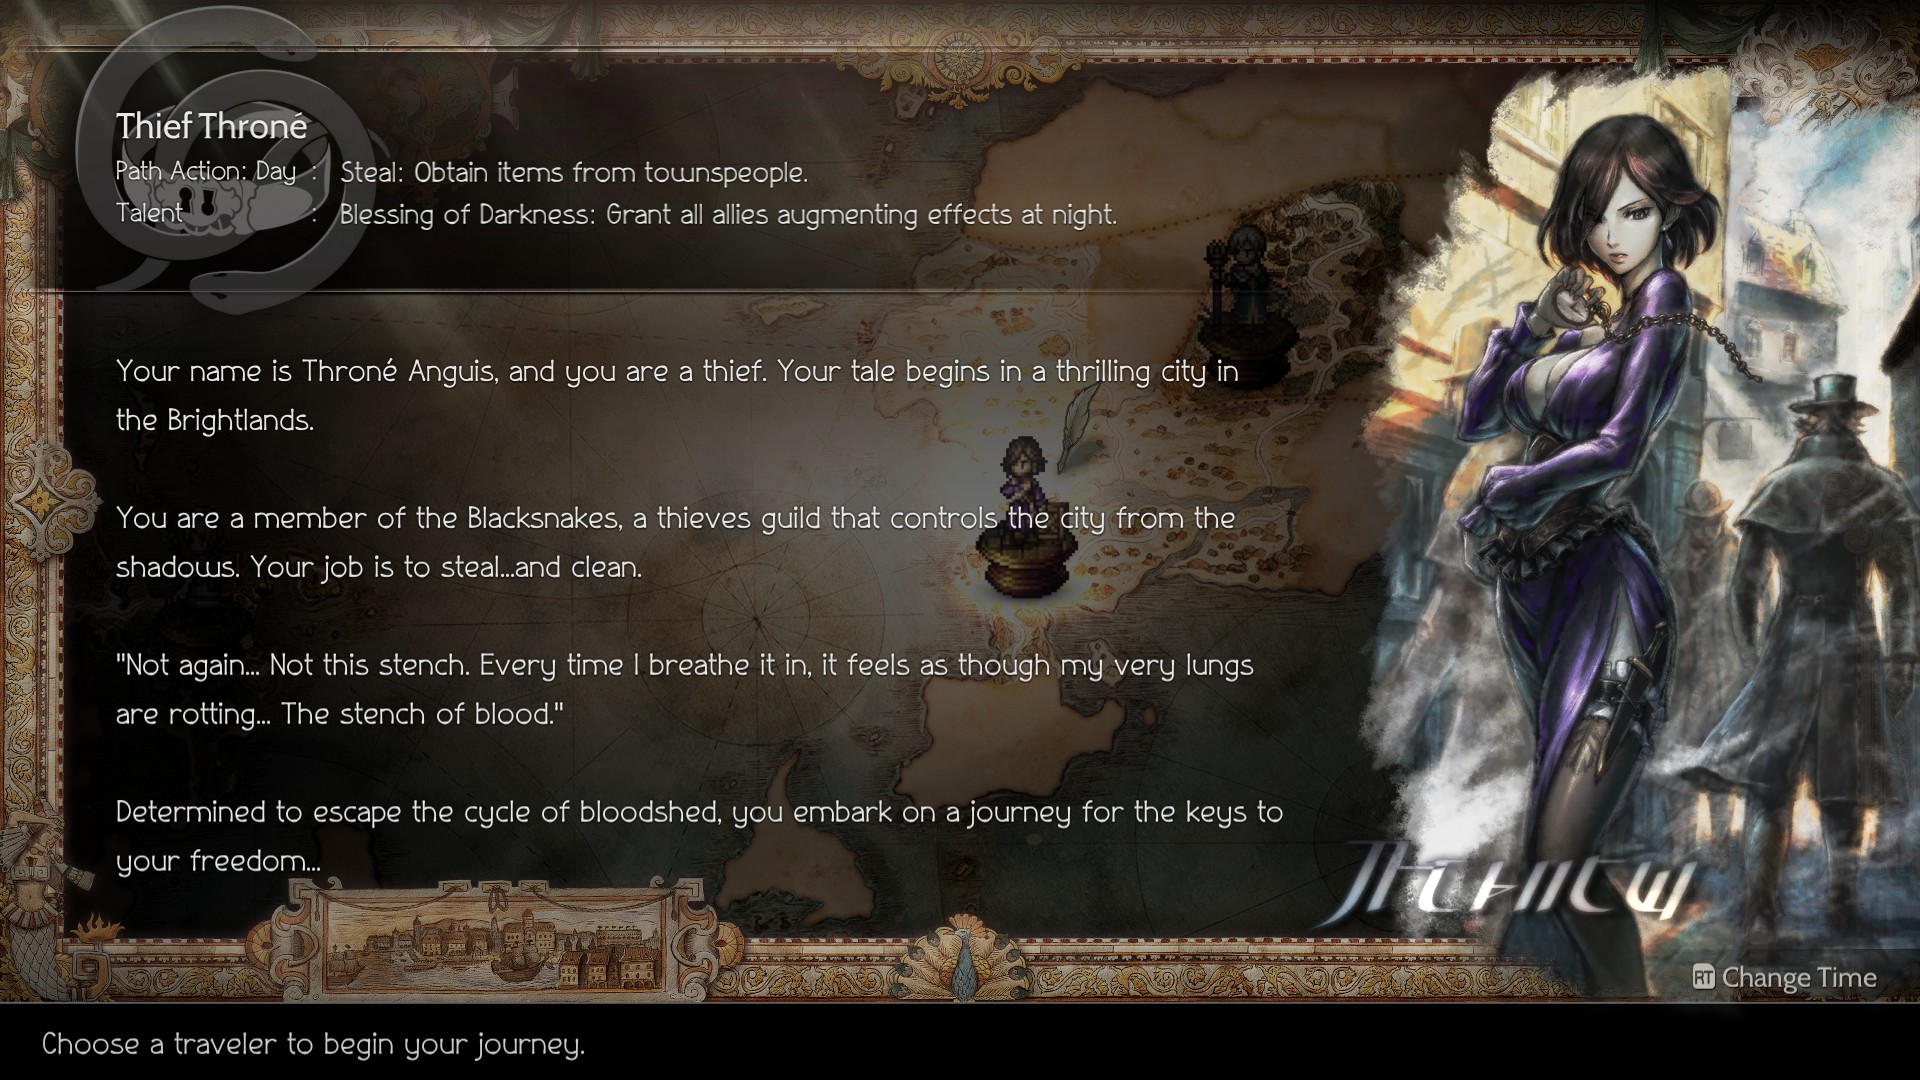 Octopath Traveler 2: Who is the best character to start with? - Meristation